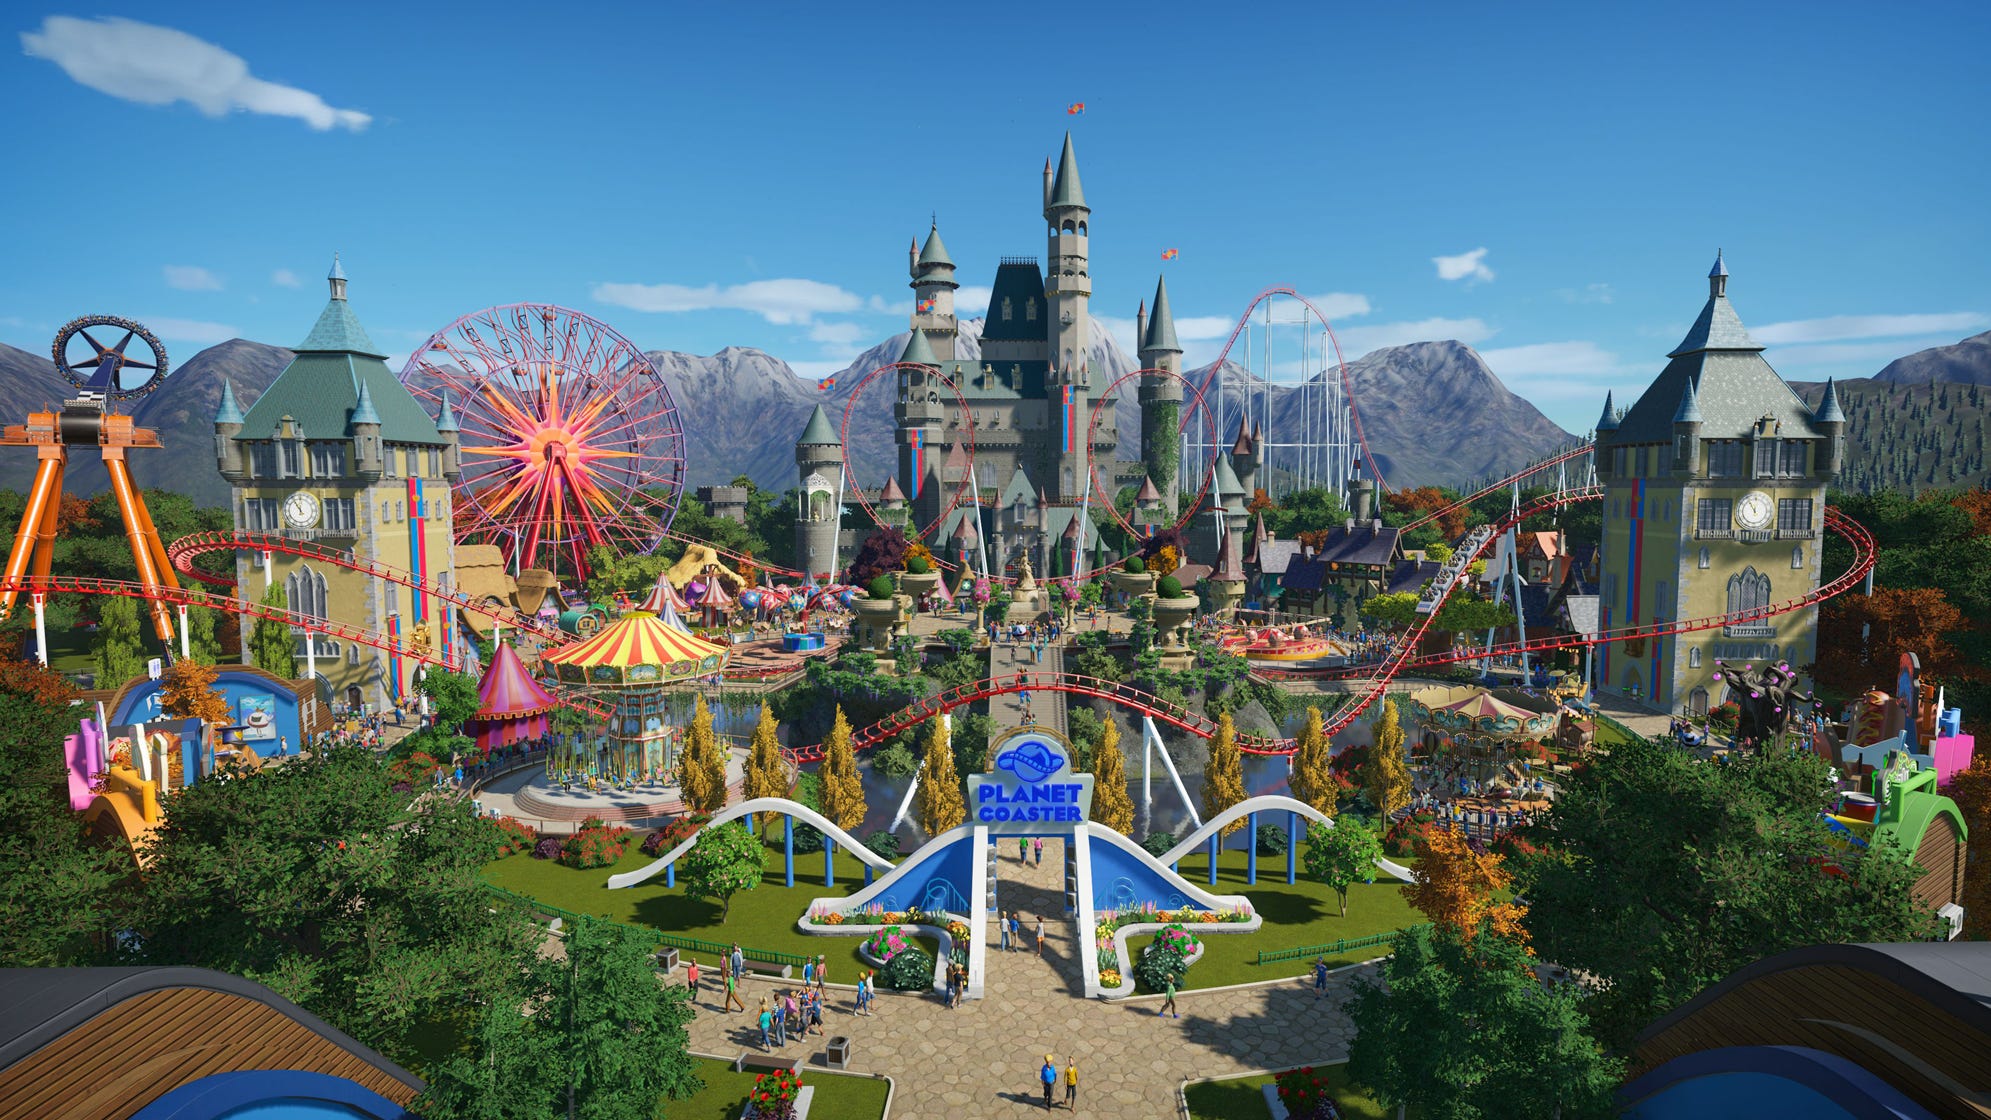 Video game review: 'Planet Coaster: Edition' return to theme park glory days